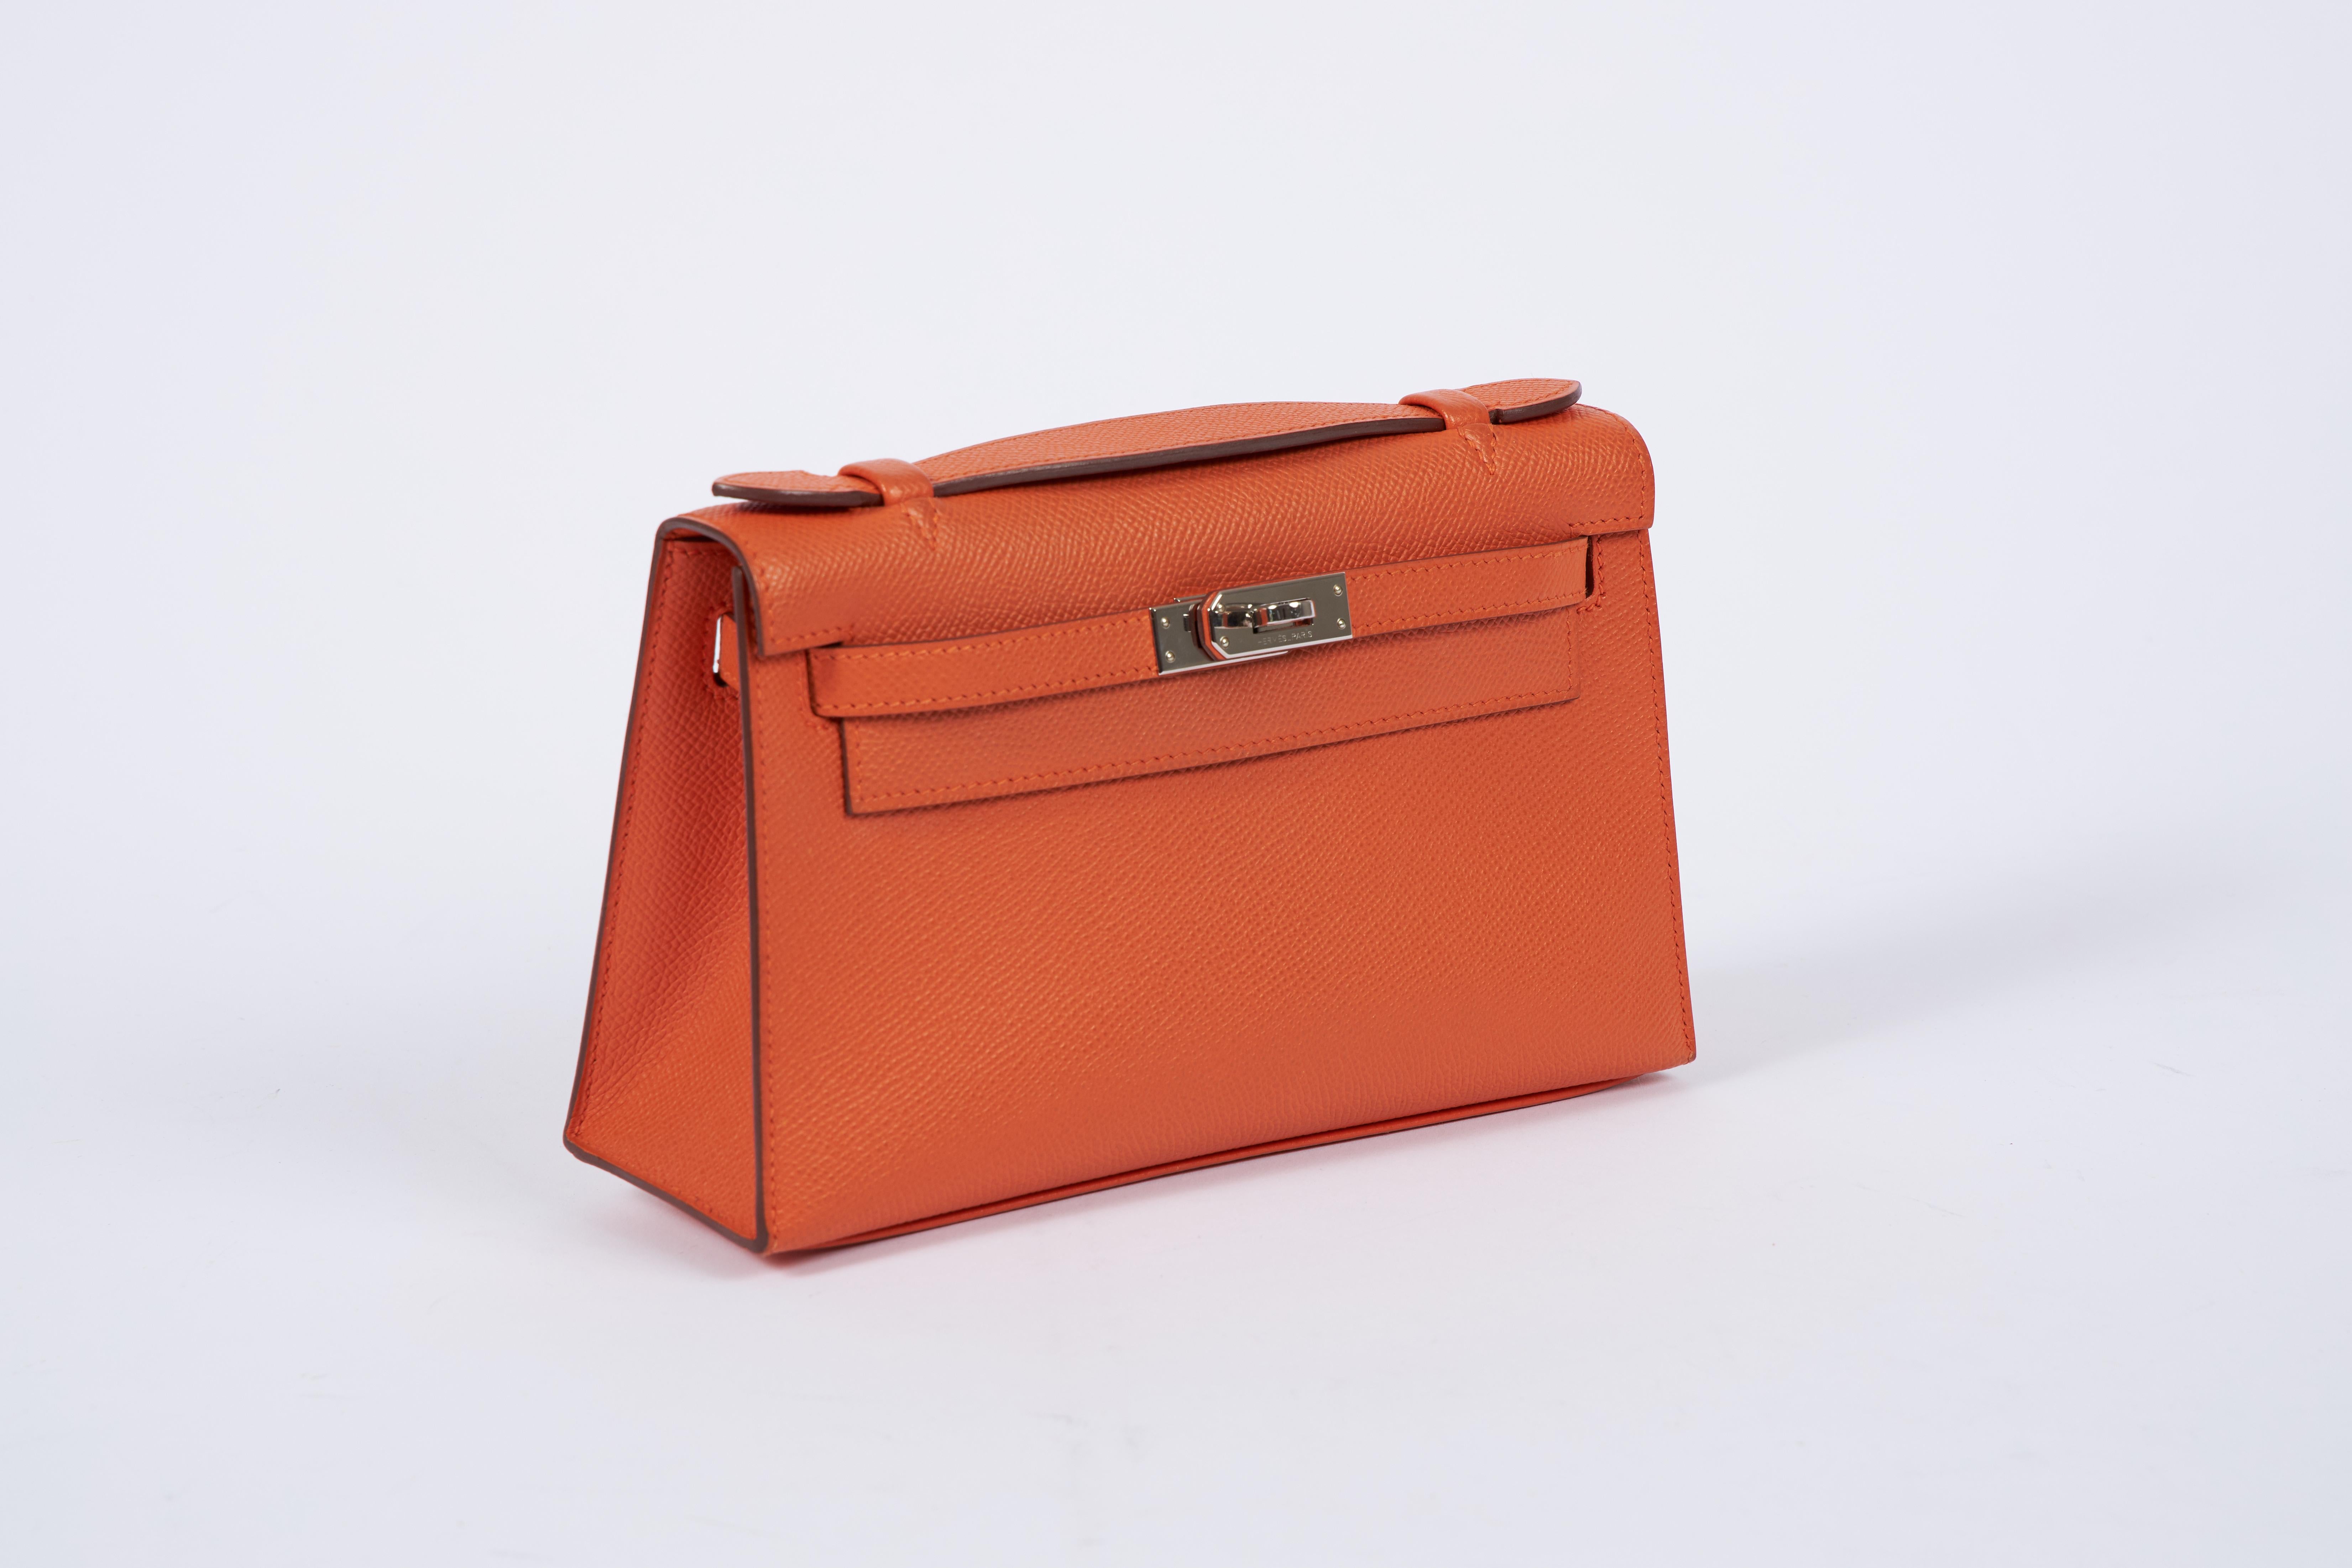 Hermes orange epsom leather Kelly pouchette with palladium hardware. Partial plastic on hardware. Date stamp Q, 2013. Comes with original dust cover.
